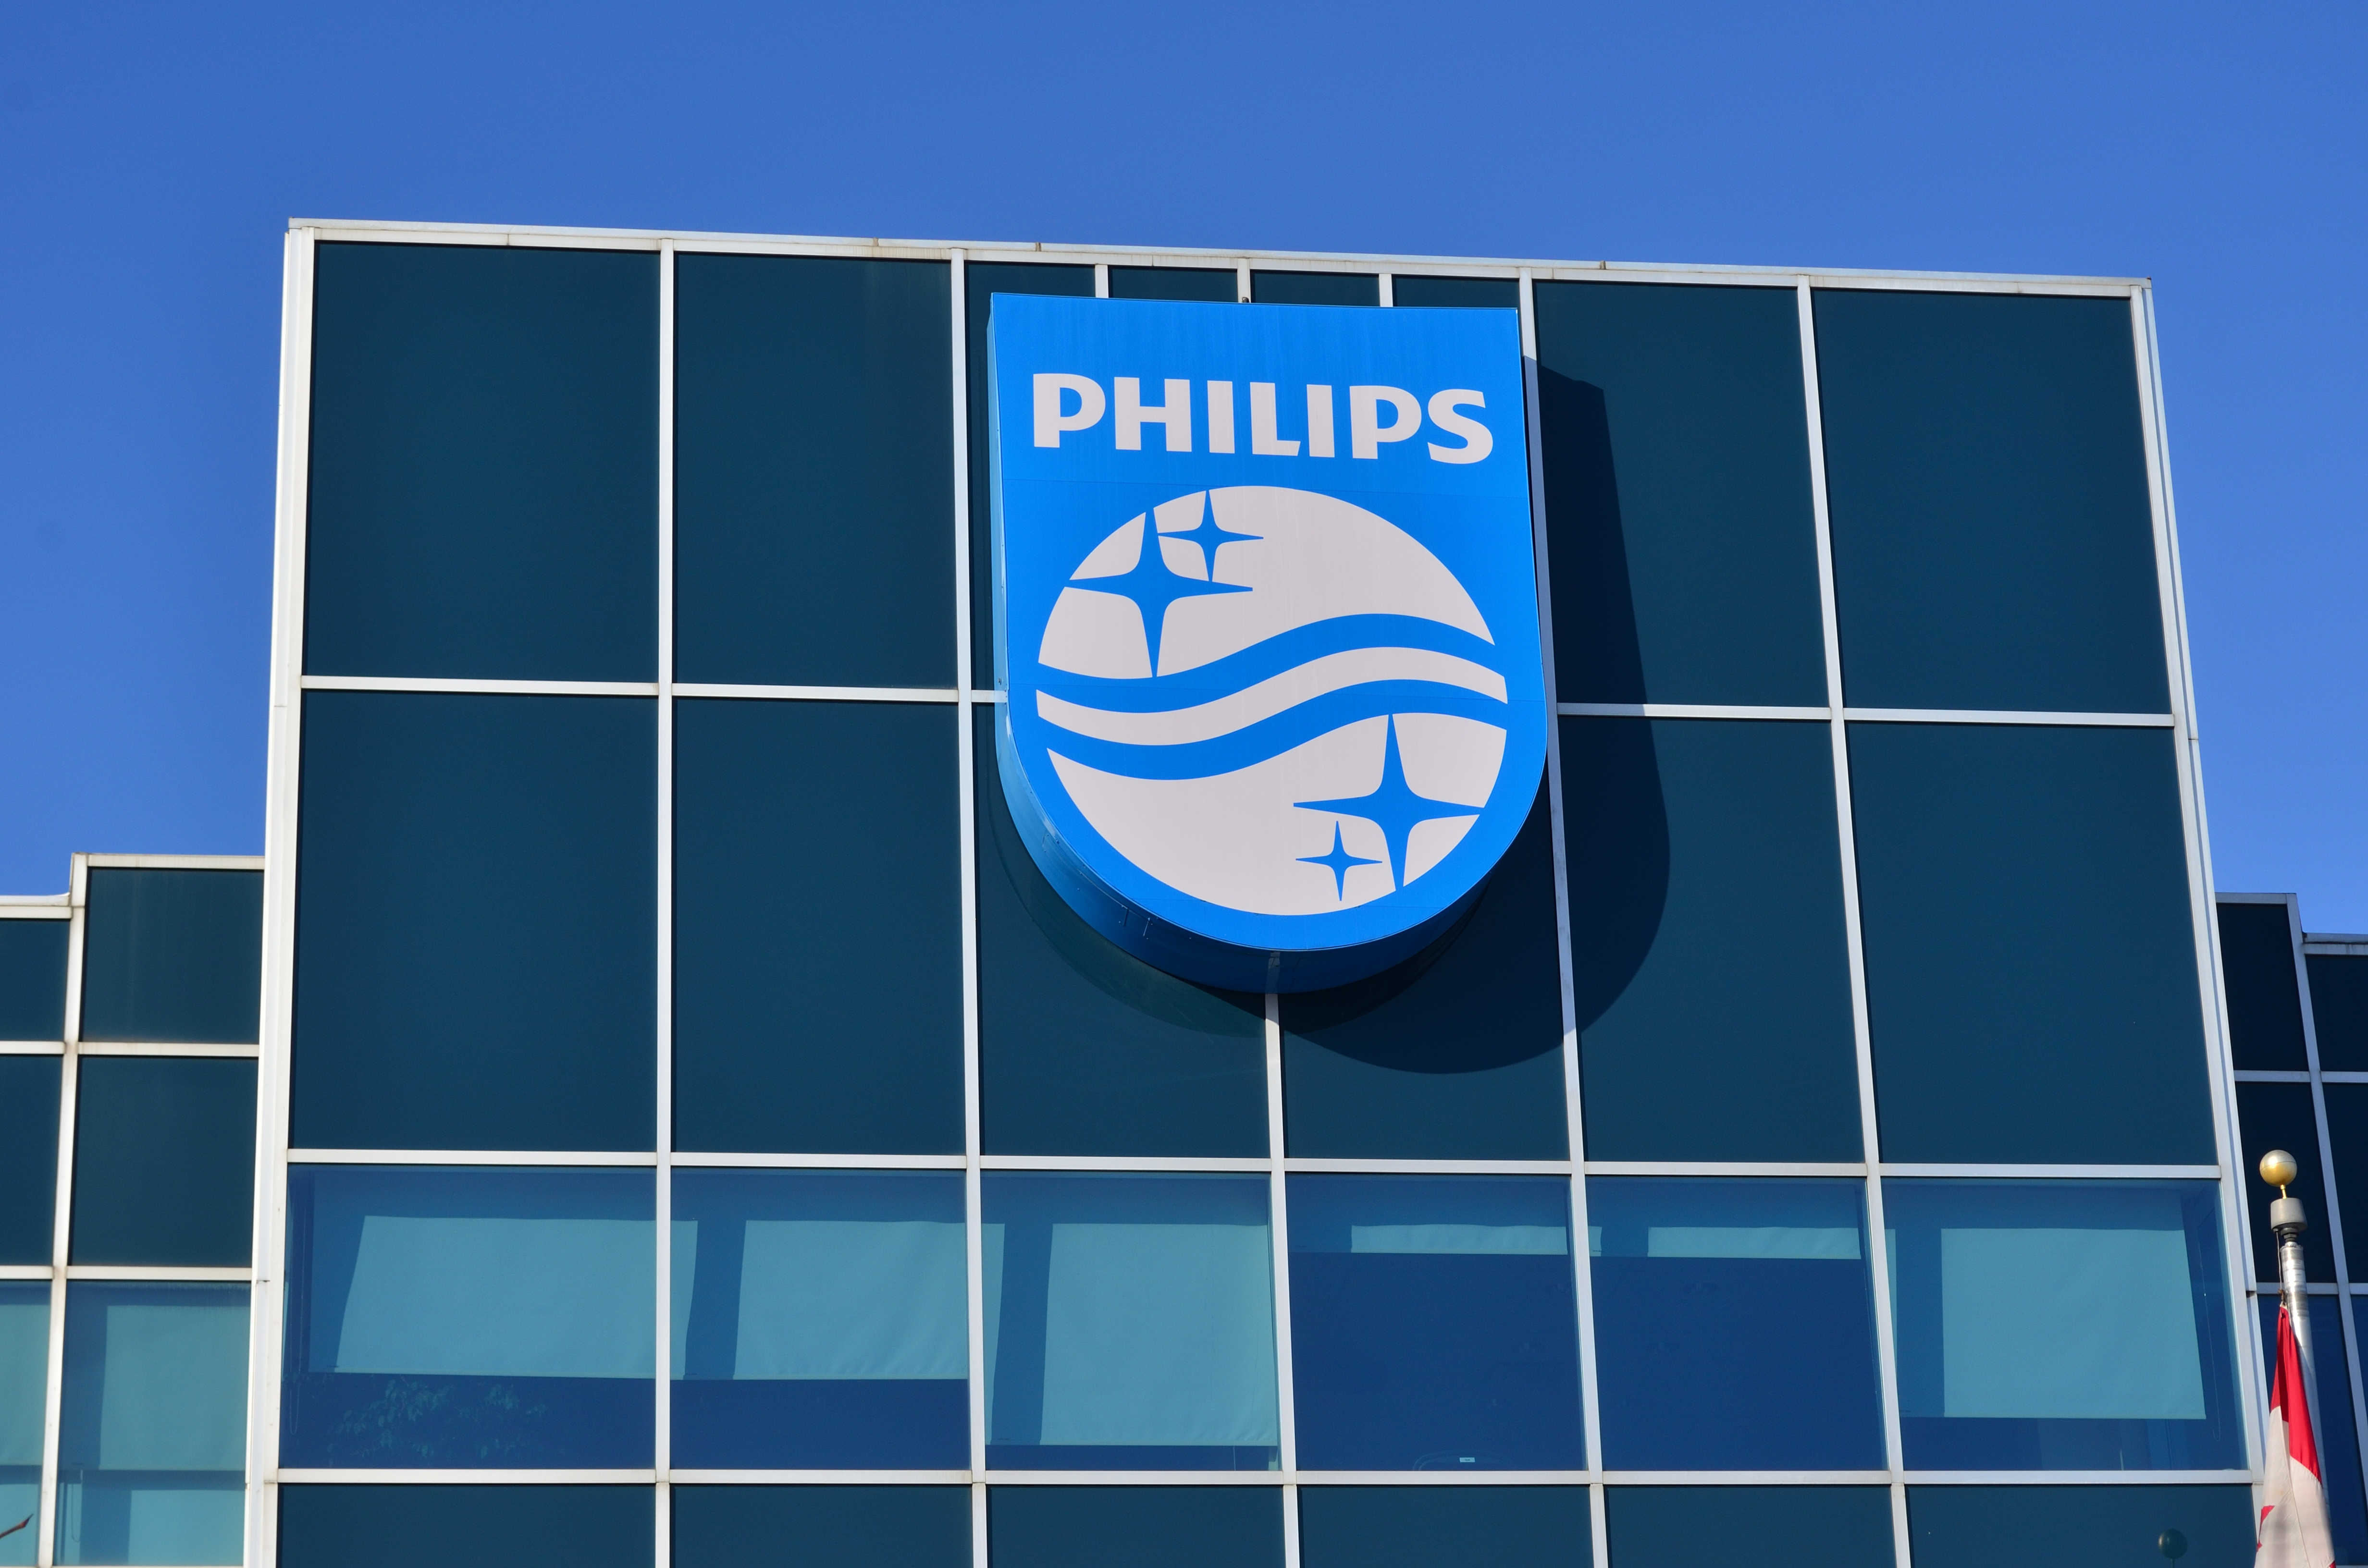 Philips: Most Up-to-Date Encyclopedia, News & Reviews